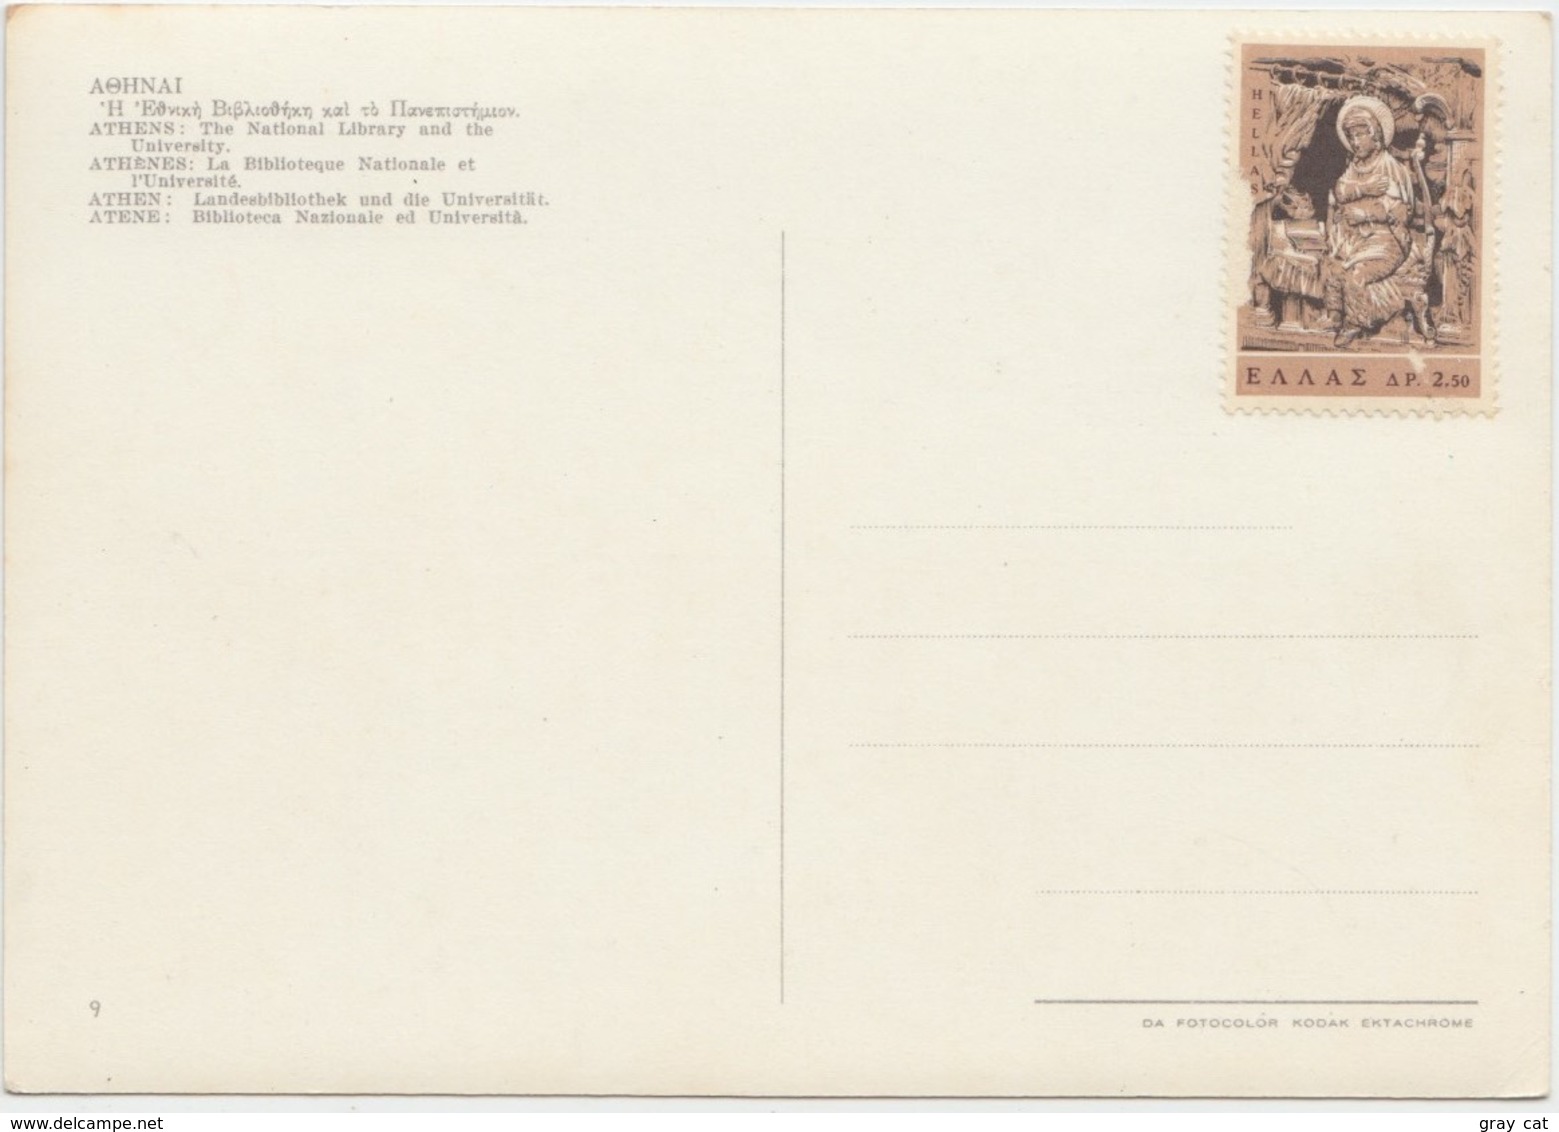 Greece, Athens, The National Library And The University, Stamped, Unused Postcard [21249] - Greece